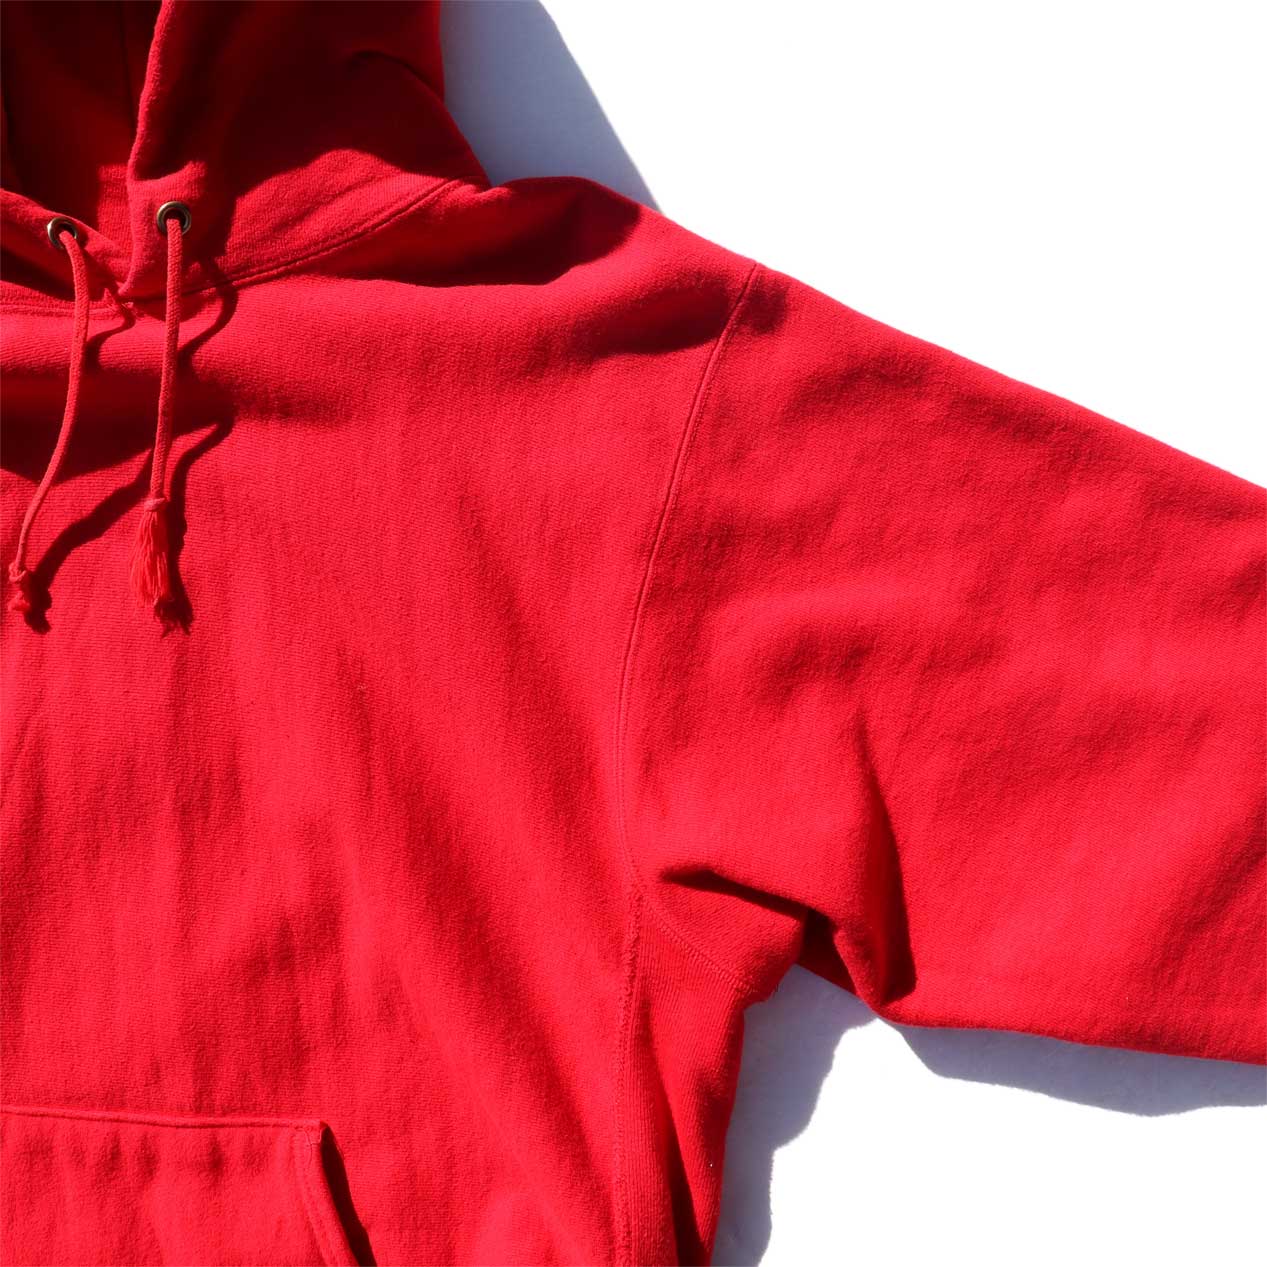 POST JUNK / 's CHAMPION Solid Red Reverse Weave Hoodie Made In